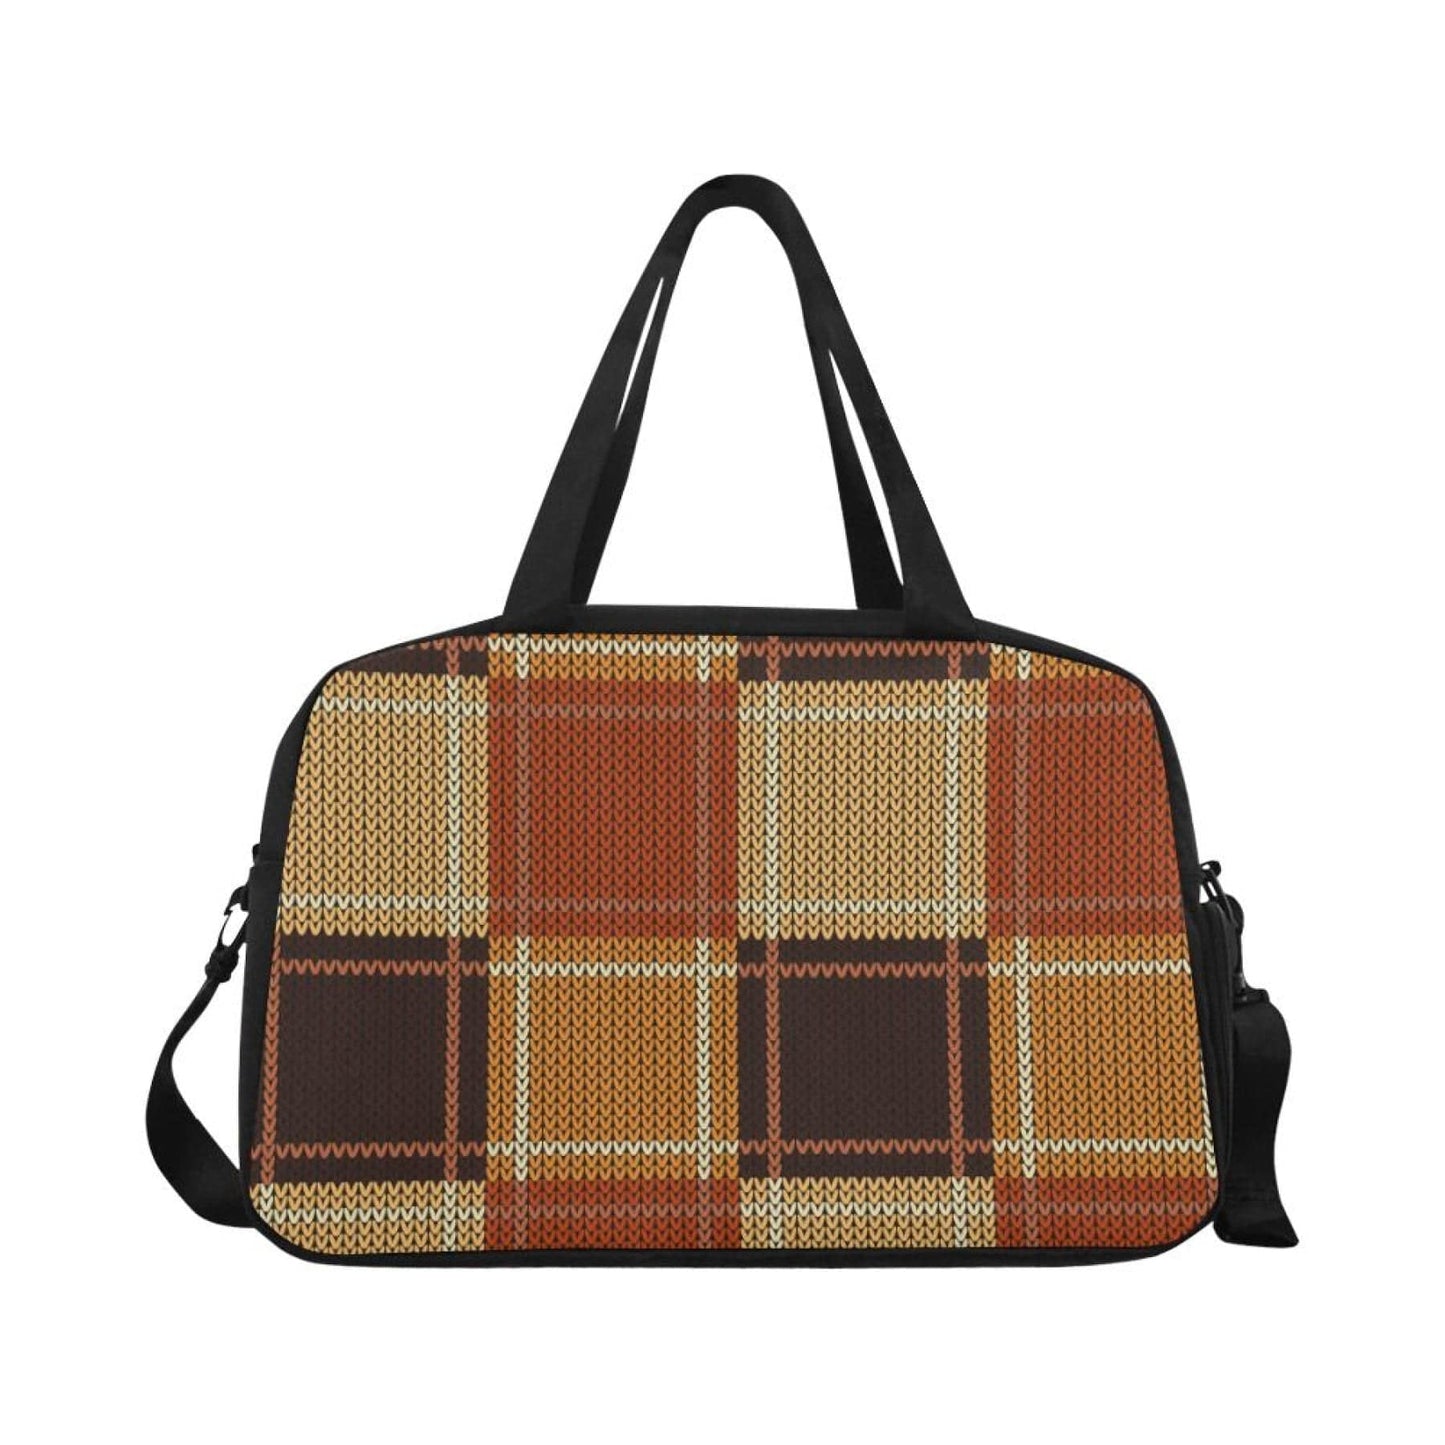 Checkered bag | Travel |Brown & Beige | CozyCouture® - Stringspeed